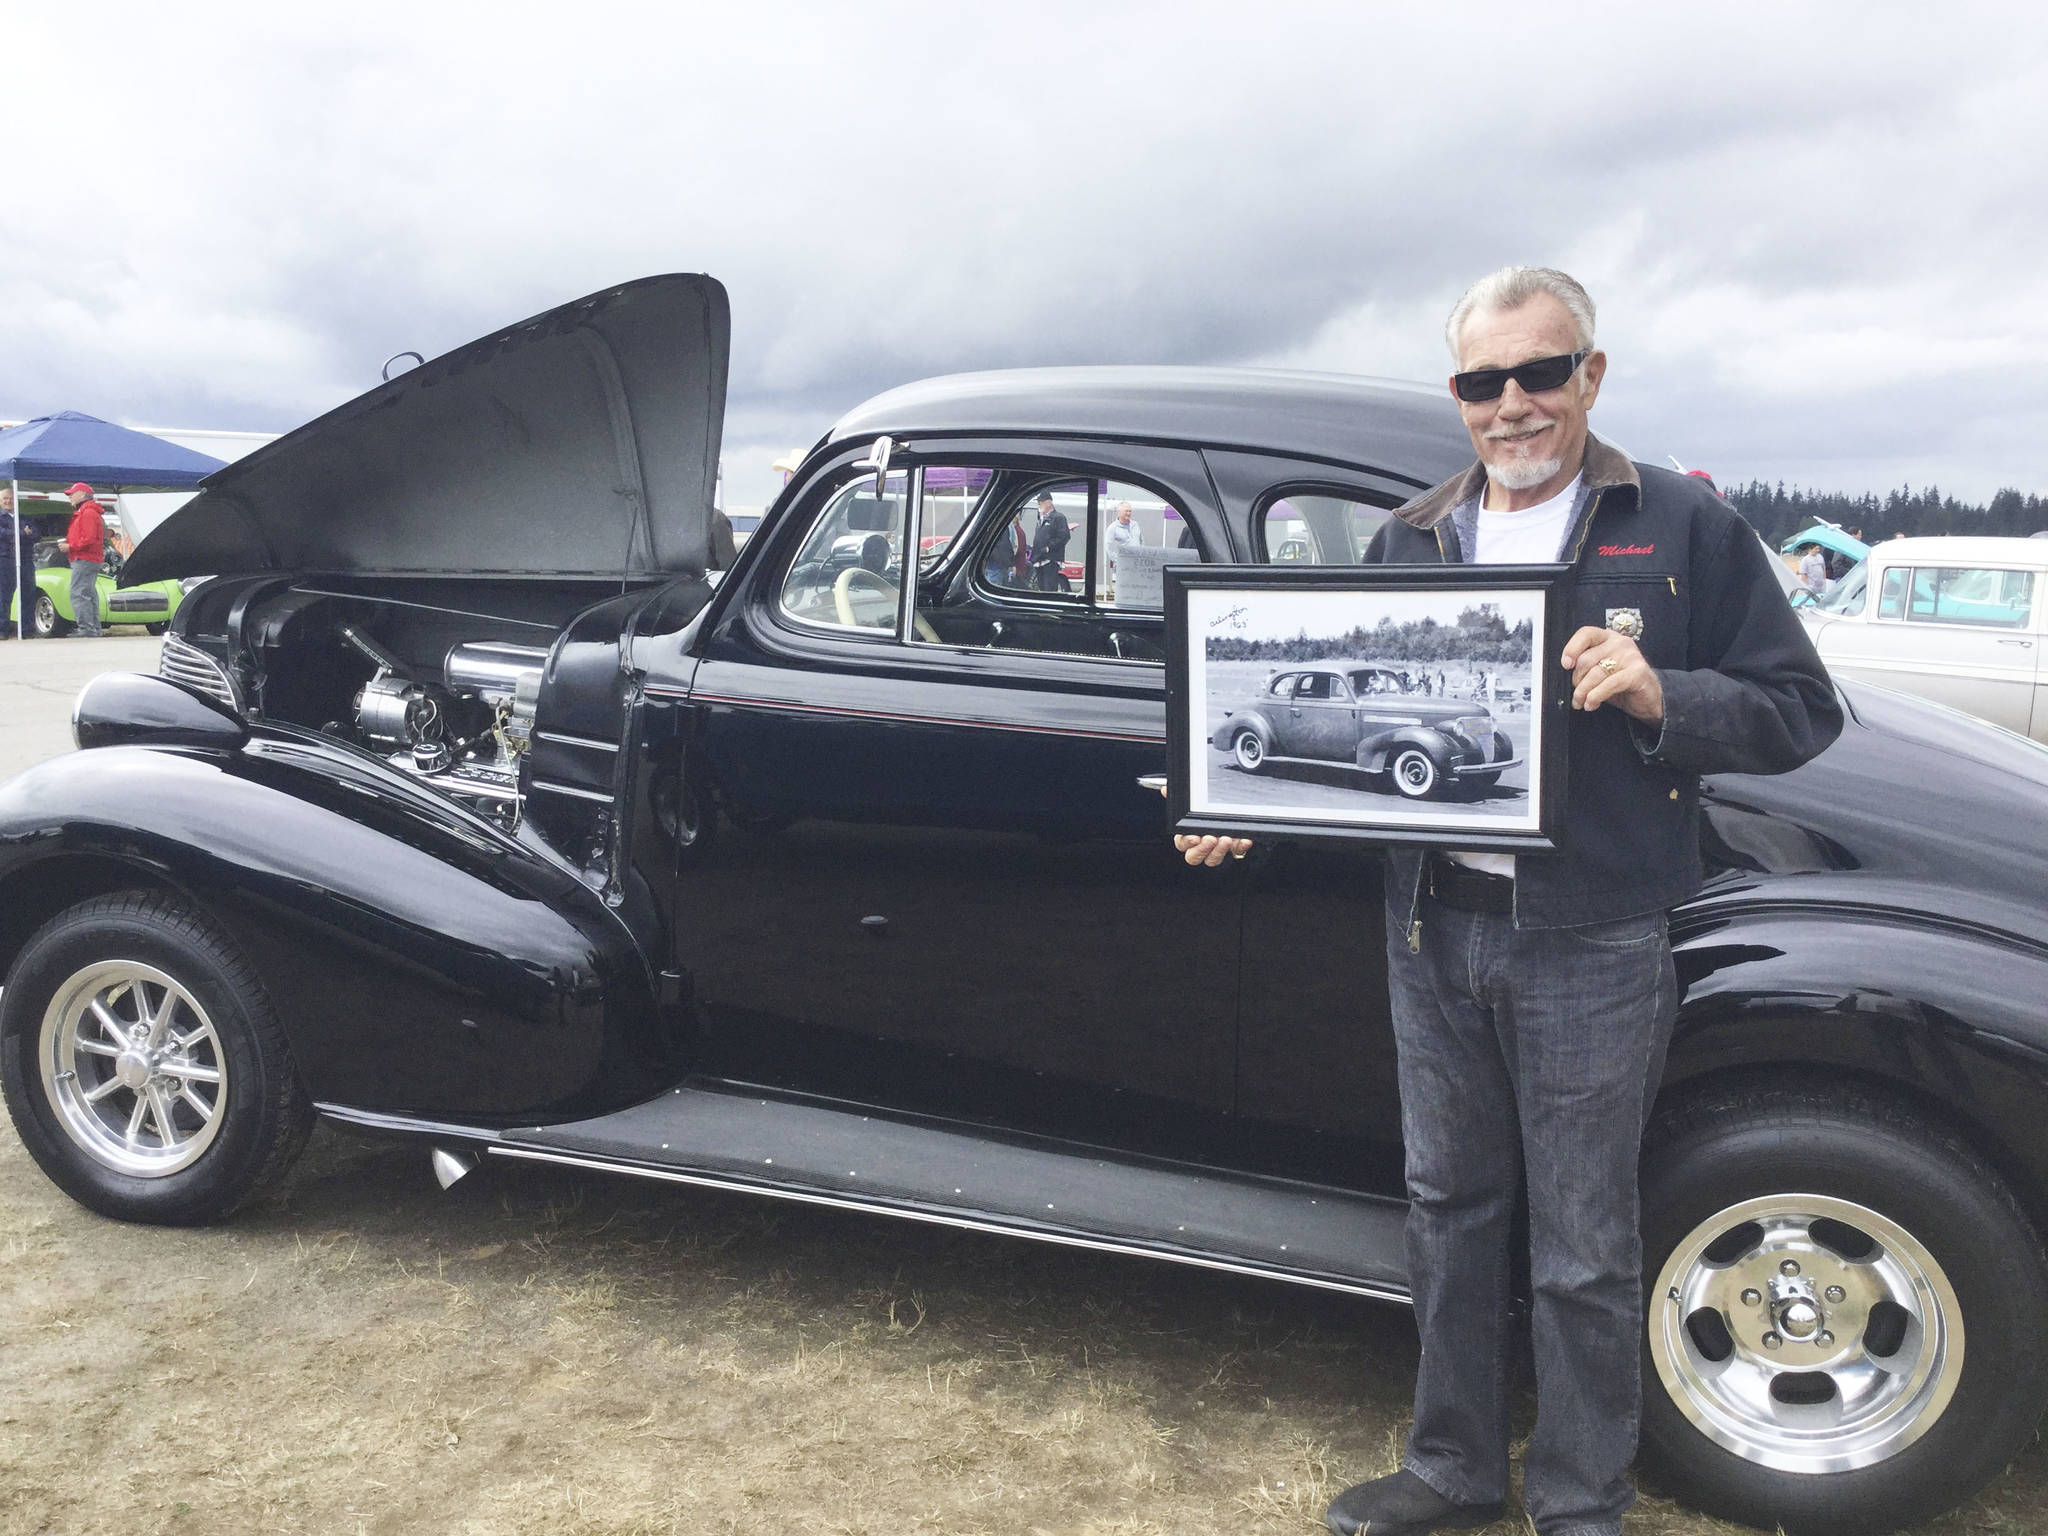 Mike Hayes of Marysville at the Arlington Drag Strip Reunion and Car Show with his restored 1939 Chevy De Luxe, a race car originally owned by legendary drag racer “Gentleman” Hank Johnson, Jr. He’s holding a old portrait of the car signed by the gentleman himself.